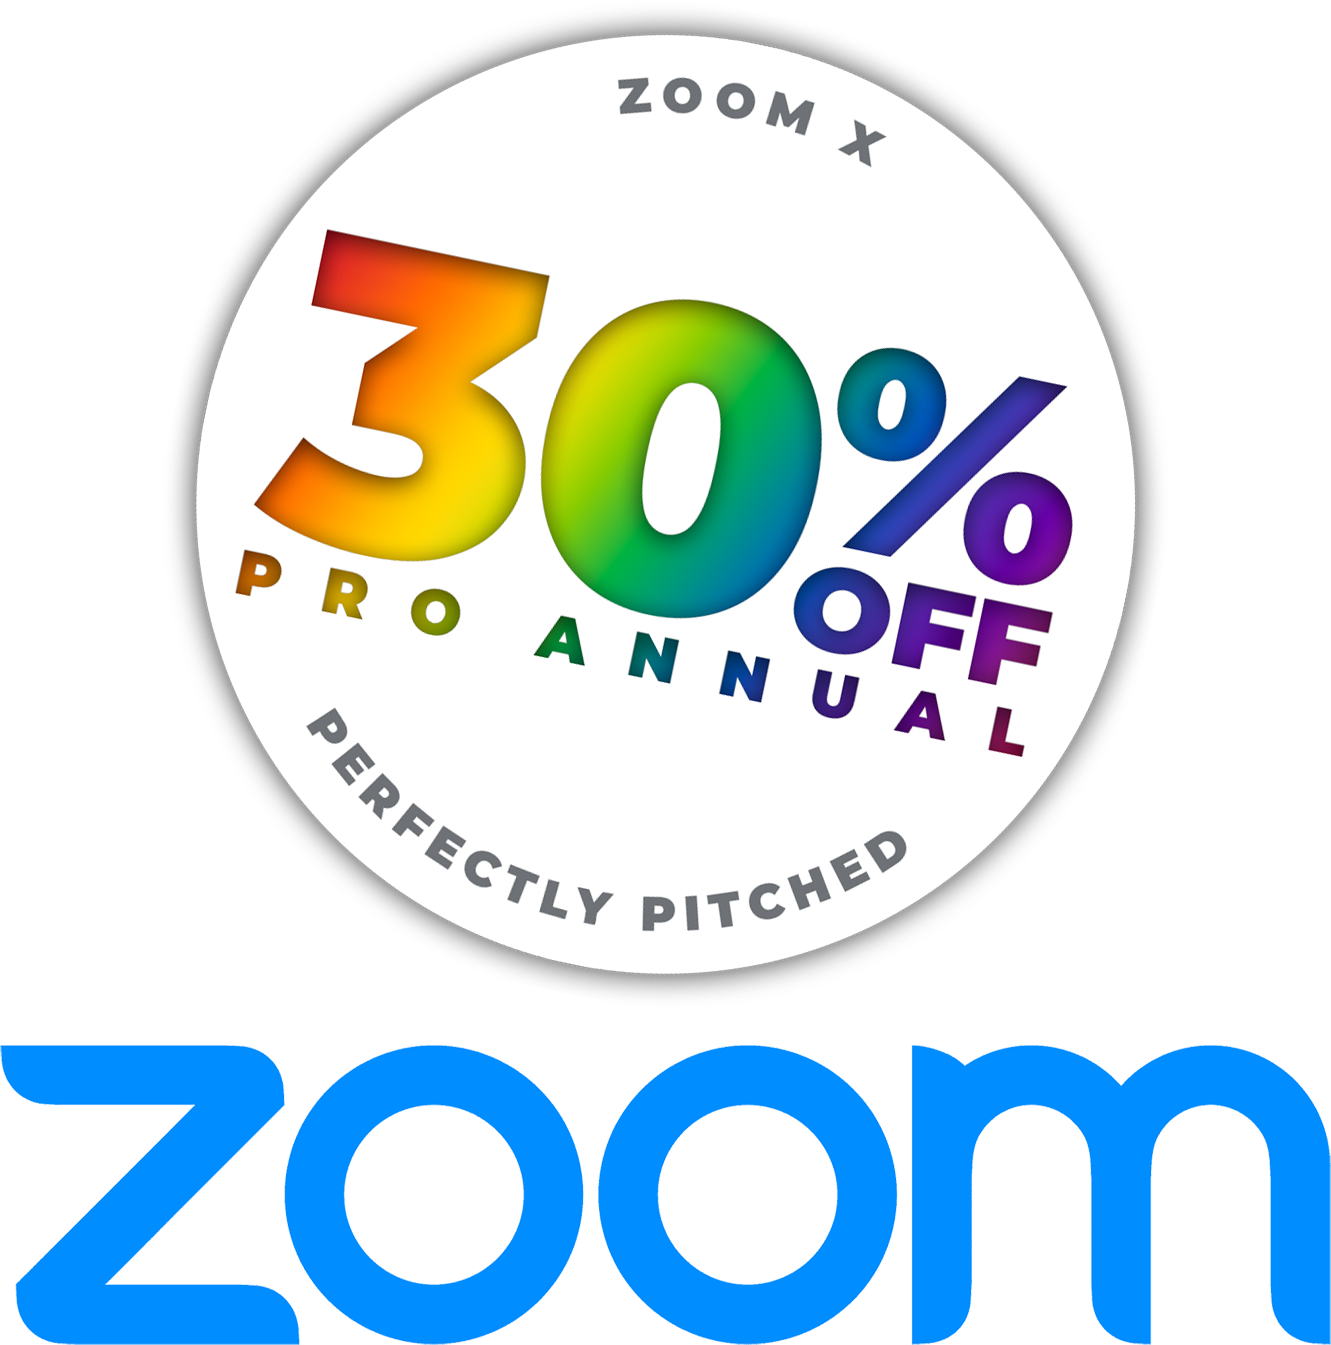 Zoom x Perfectly Pitched - get 30% off pro annual subscriptions